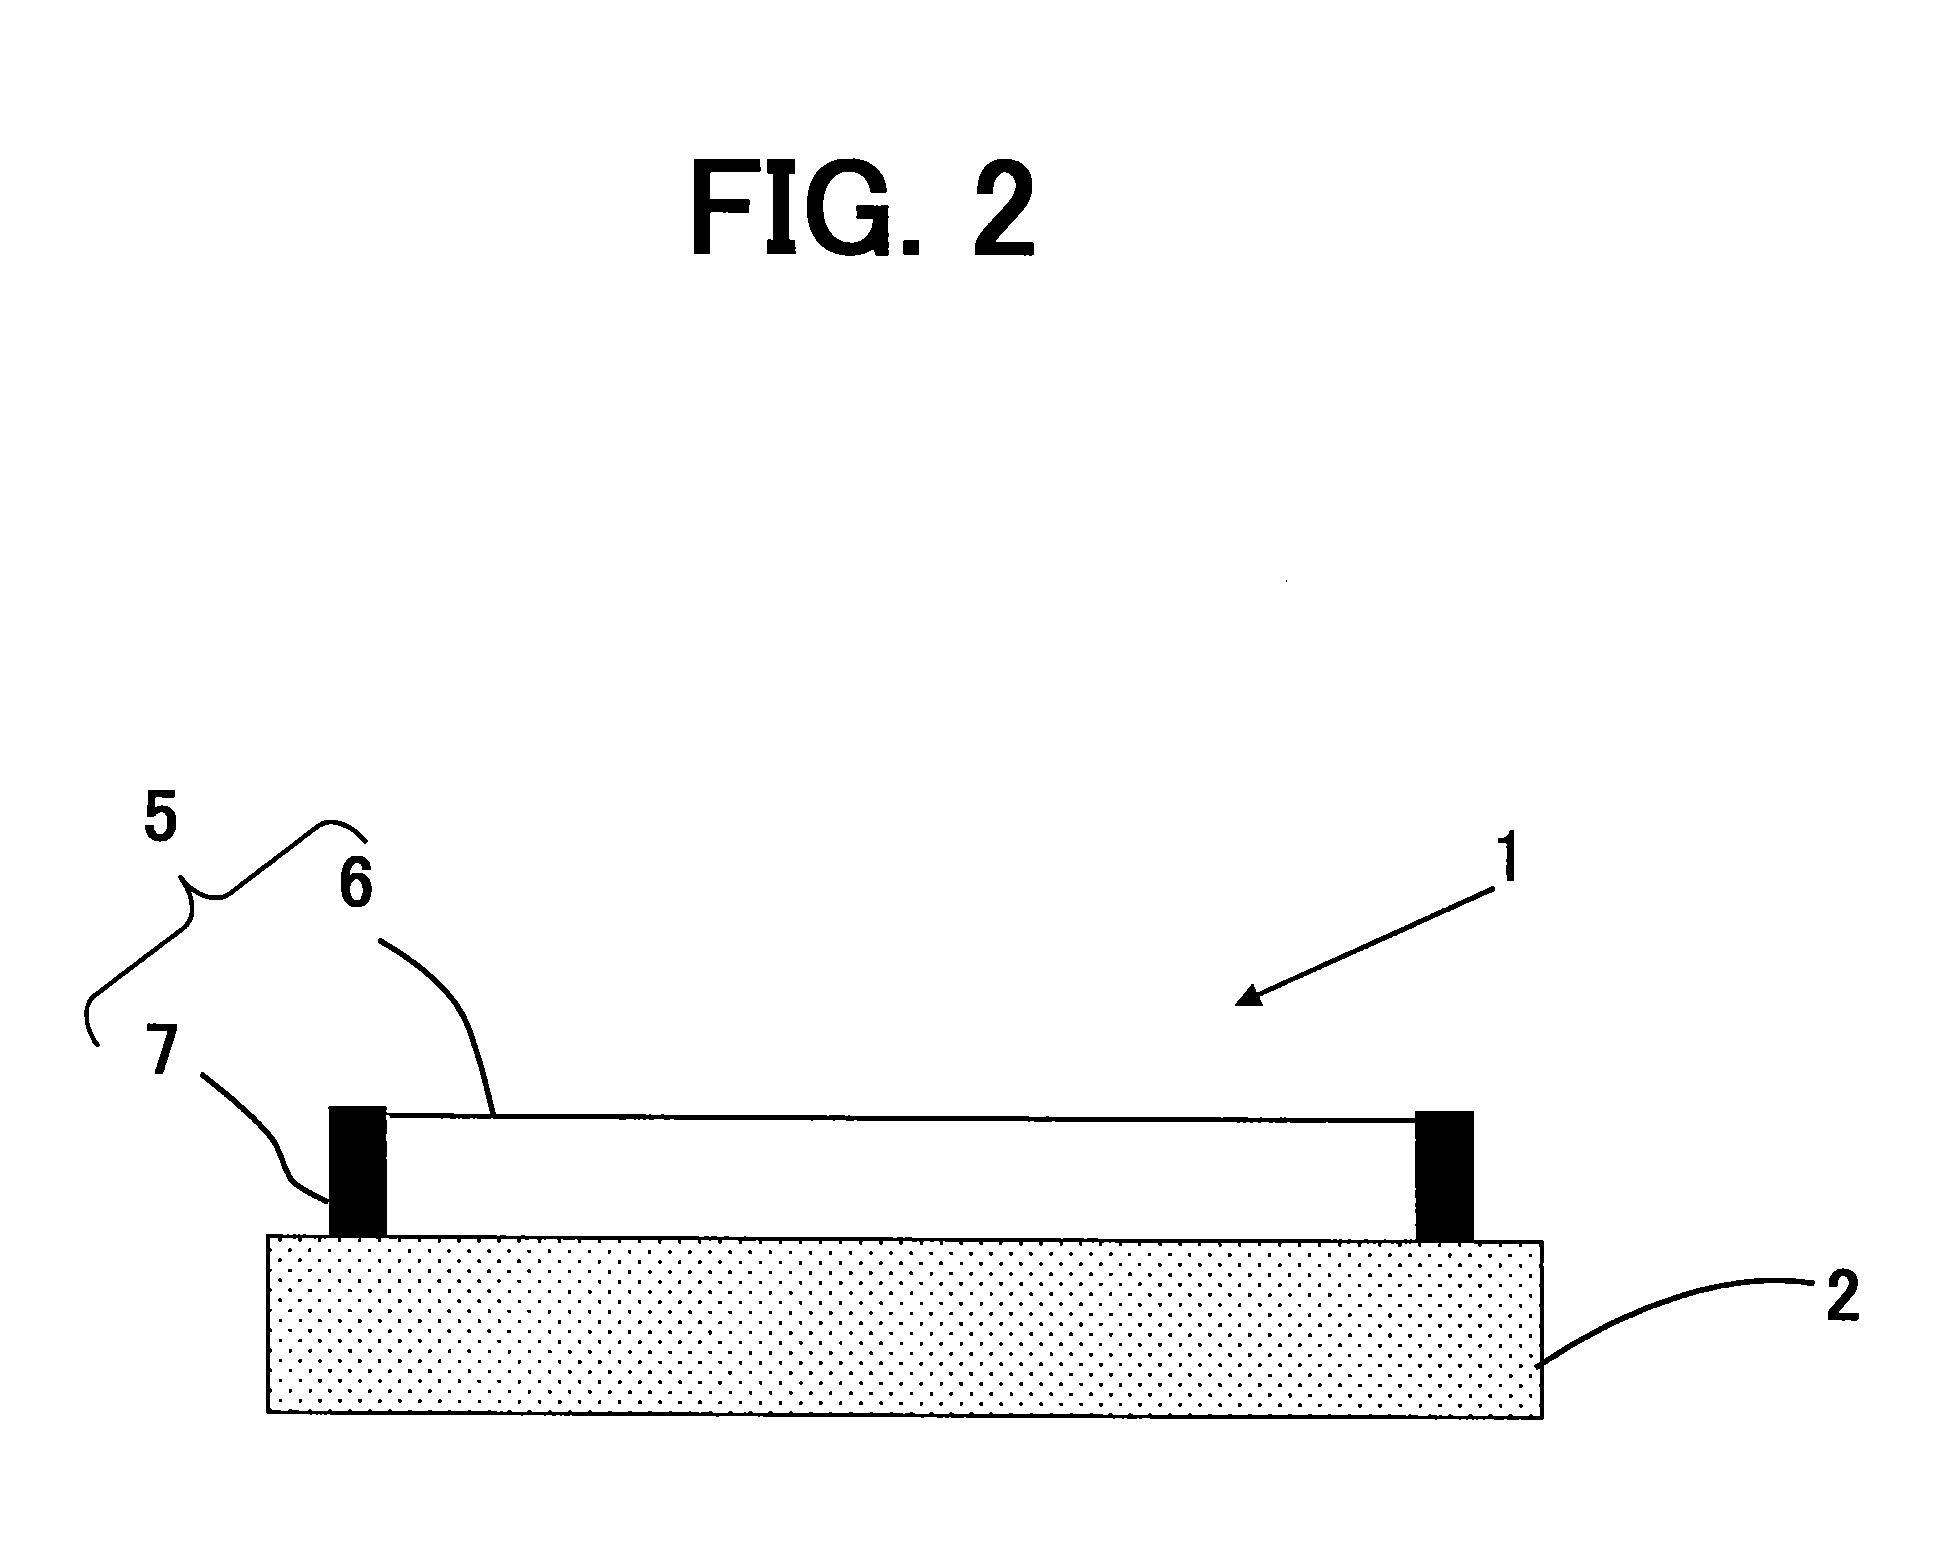 Photo mask unit comprising a photomask and a pellicle and a method for manufacturing the same